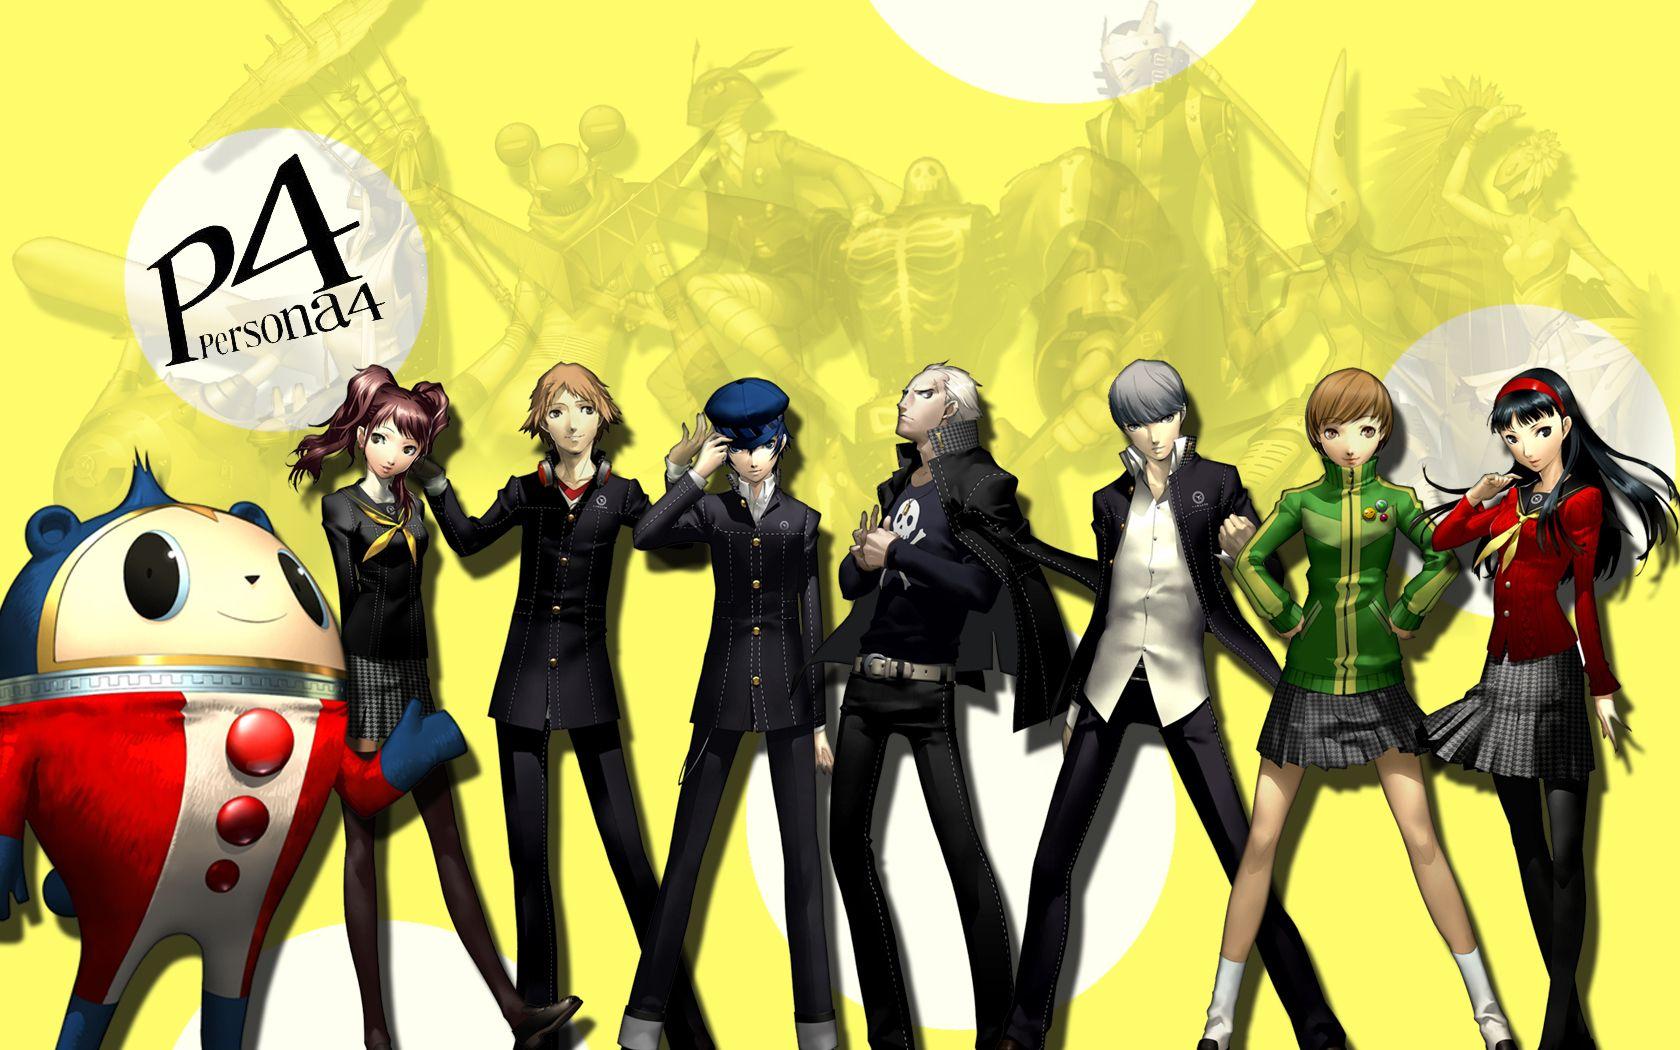 Persona 4 releasing on PS3 April 8th as PS2 Classic Gaming